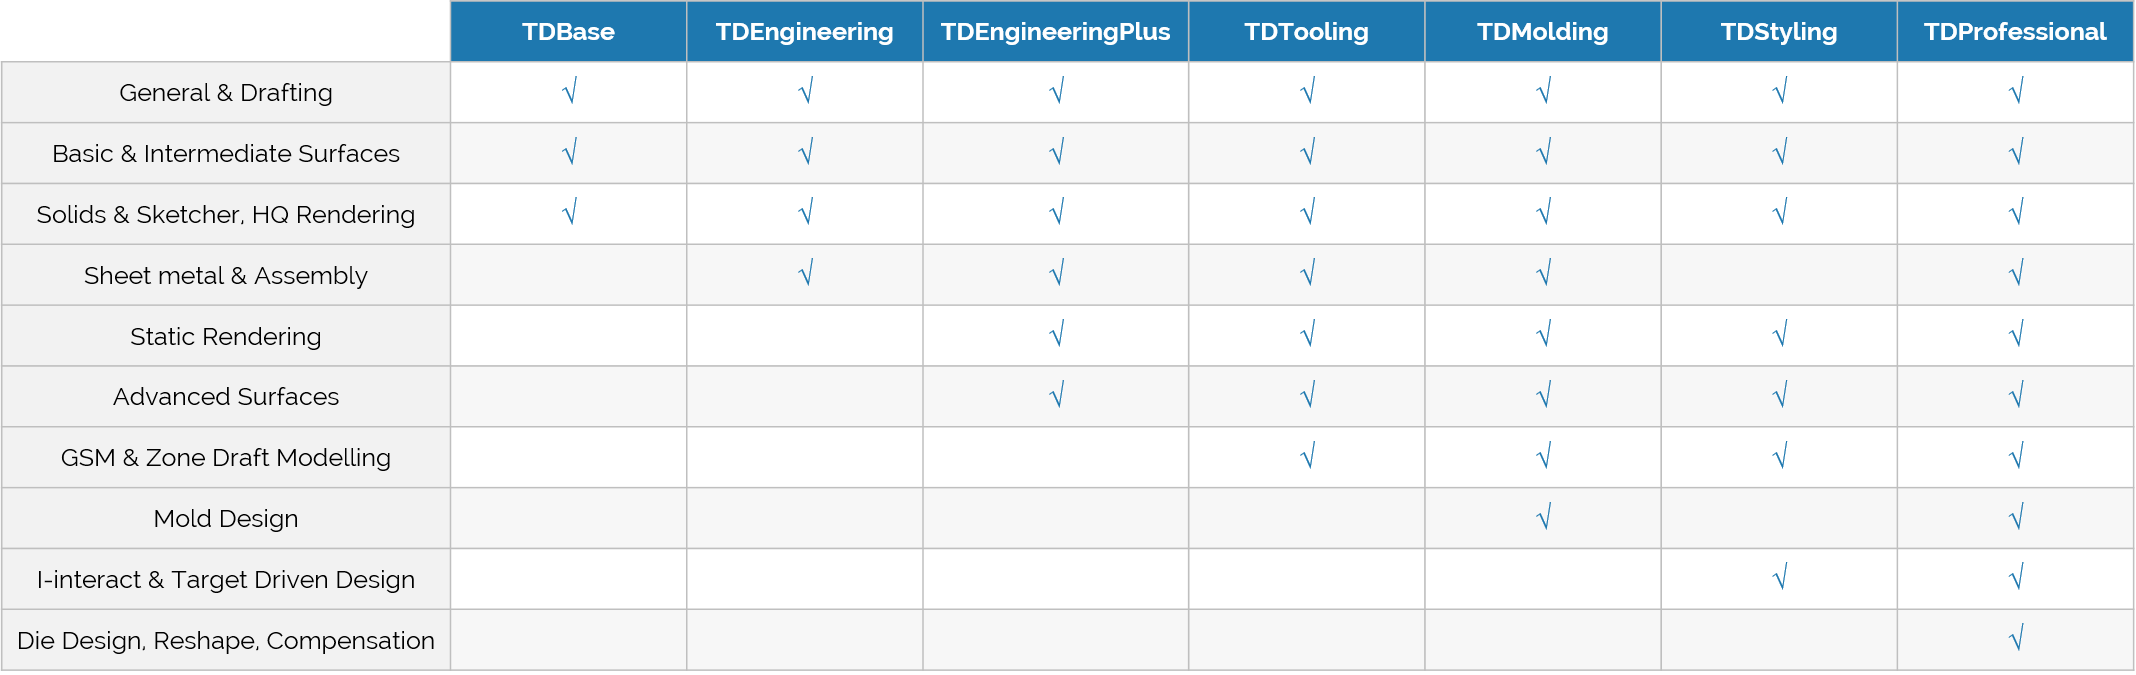 TDproducts-comparison